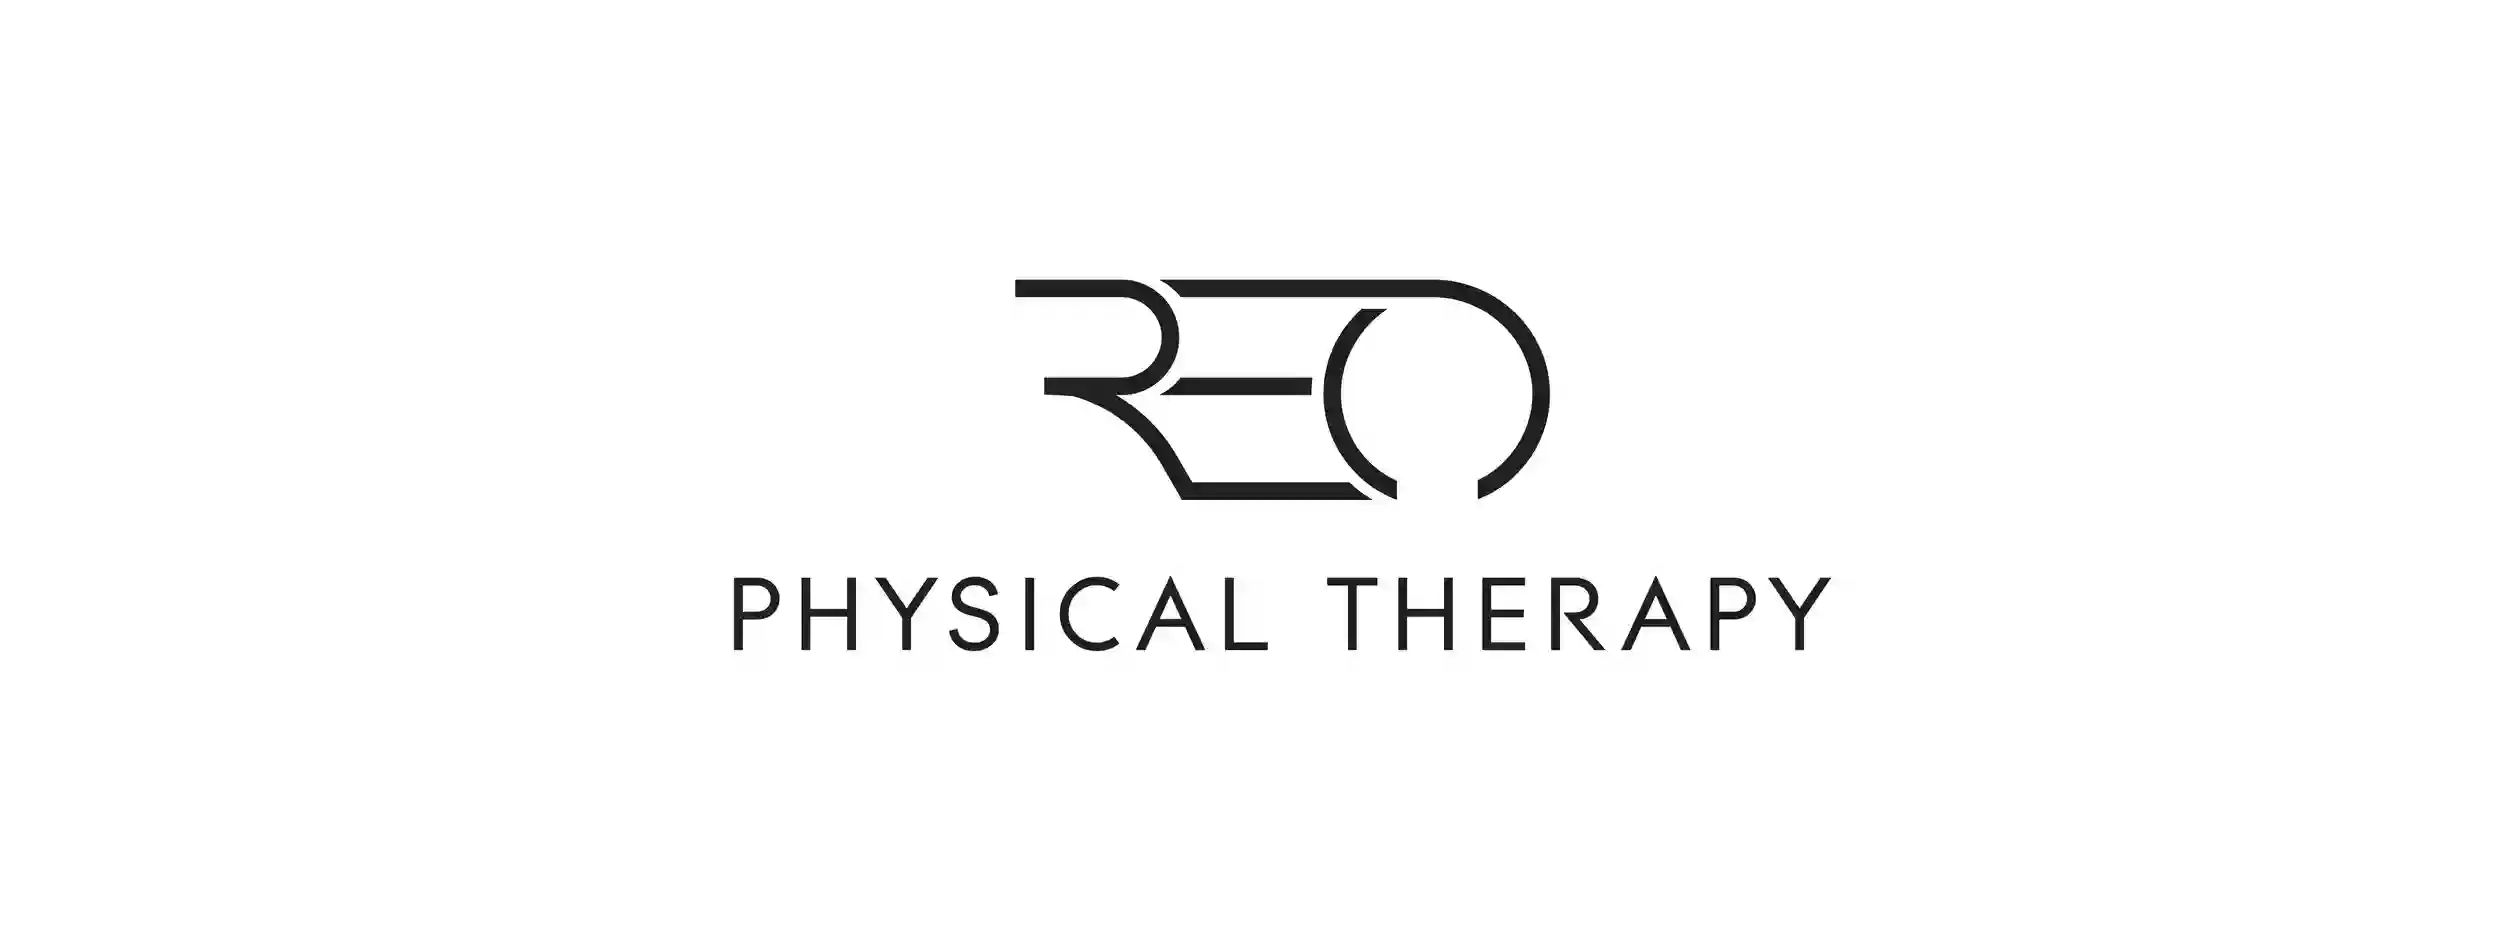 REO Physical Therapy